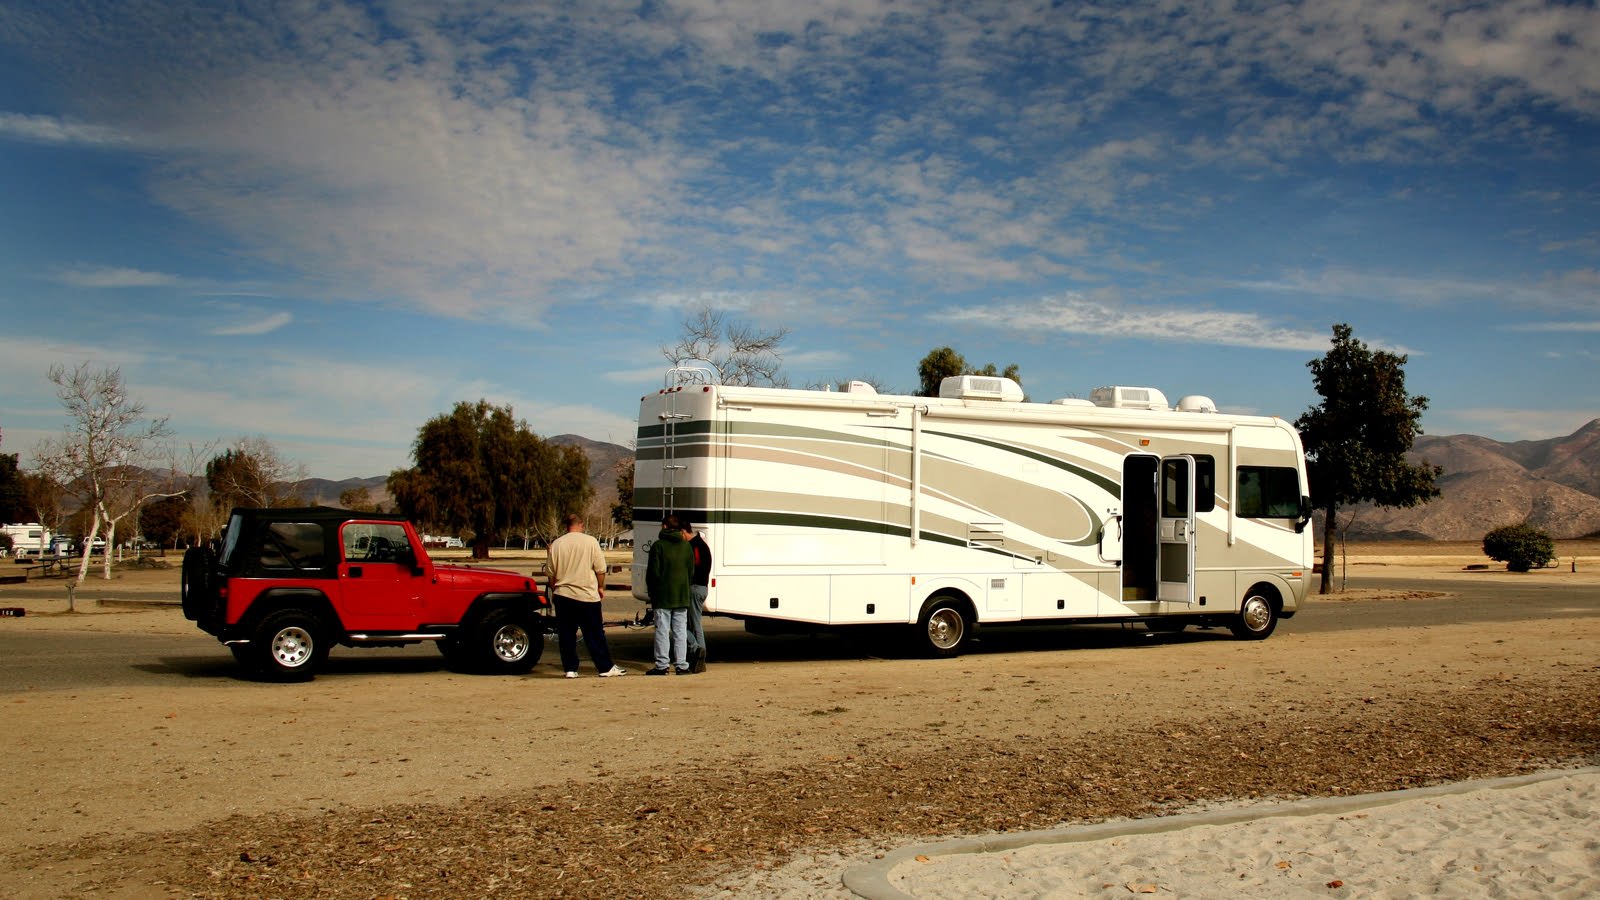 The Best Cars to Tow Behind an RV - CarGurus